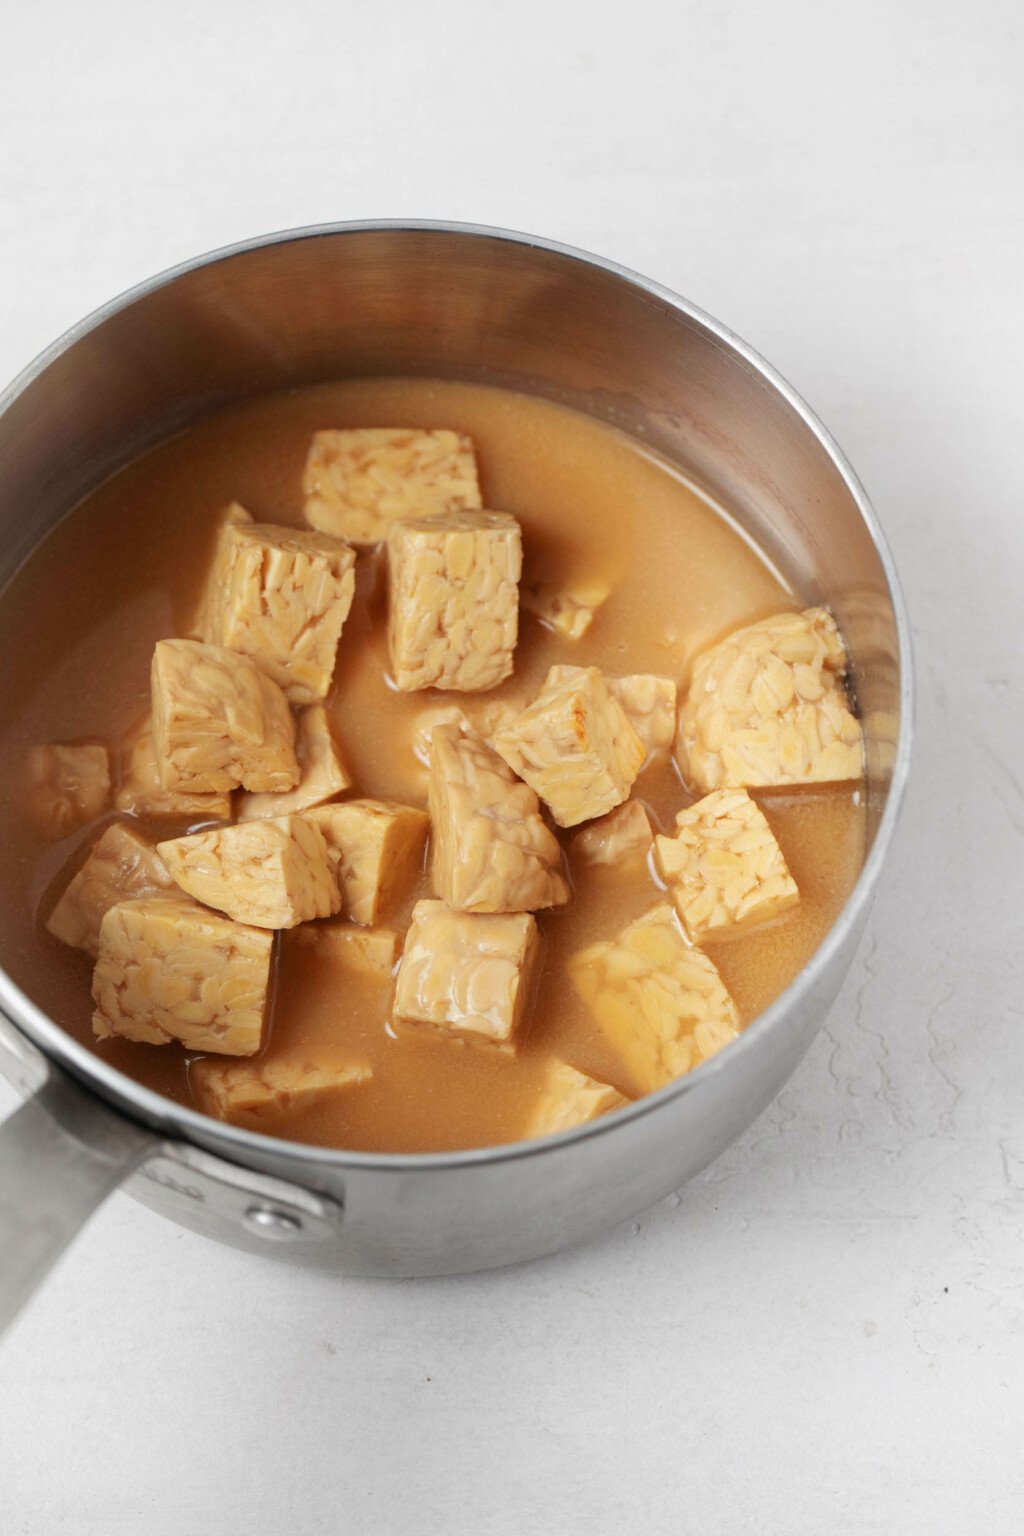 Tempeh and broth are simmered in a small saucepan.